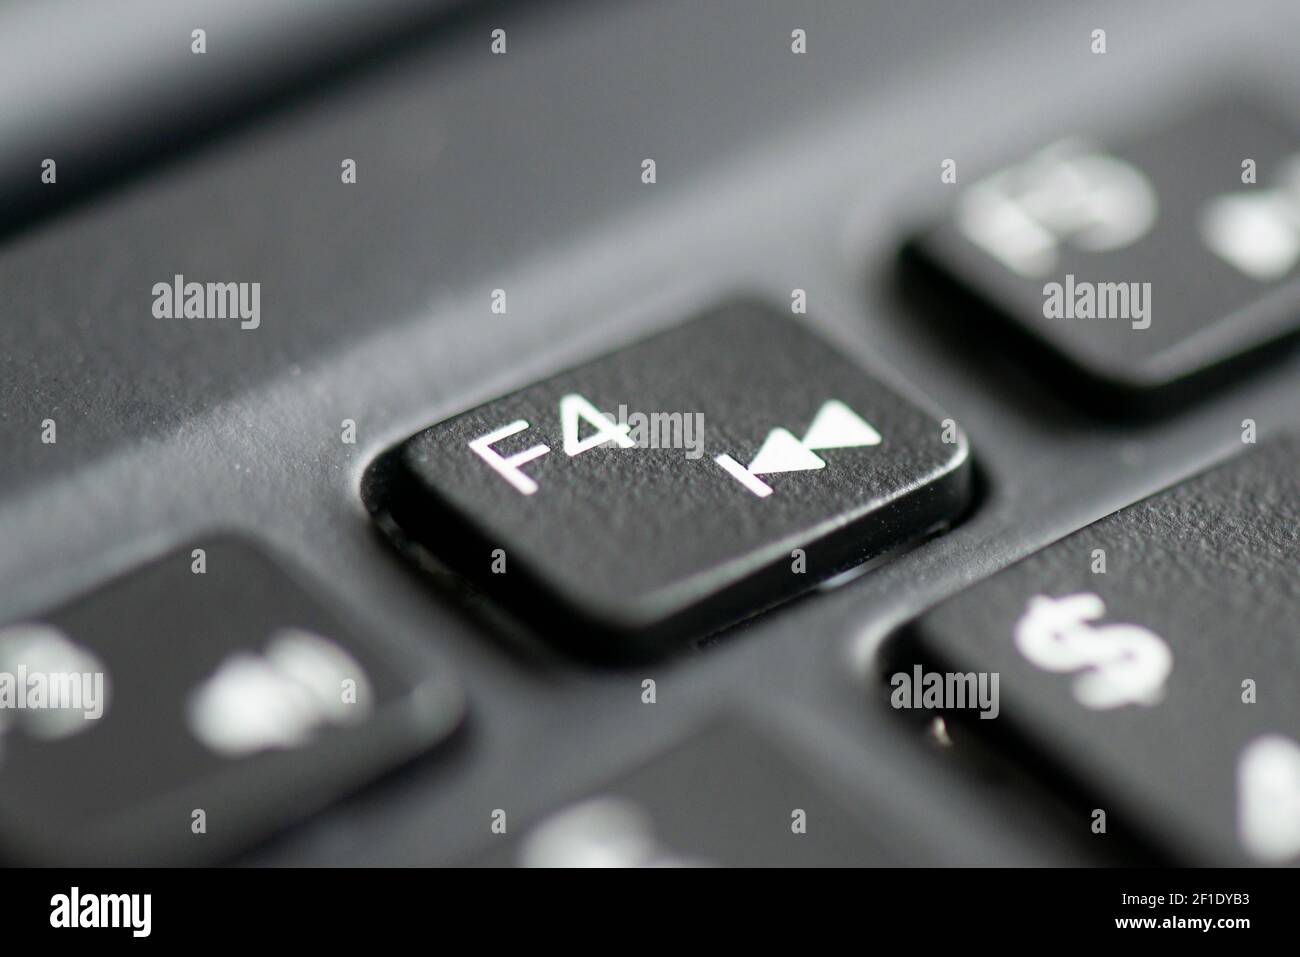 F4 and play previous track key on a laptop keyboard Stock Photo - Alamy